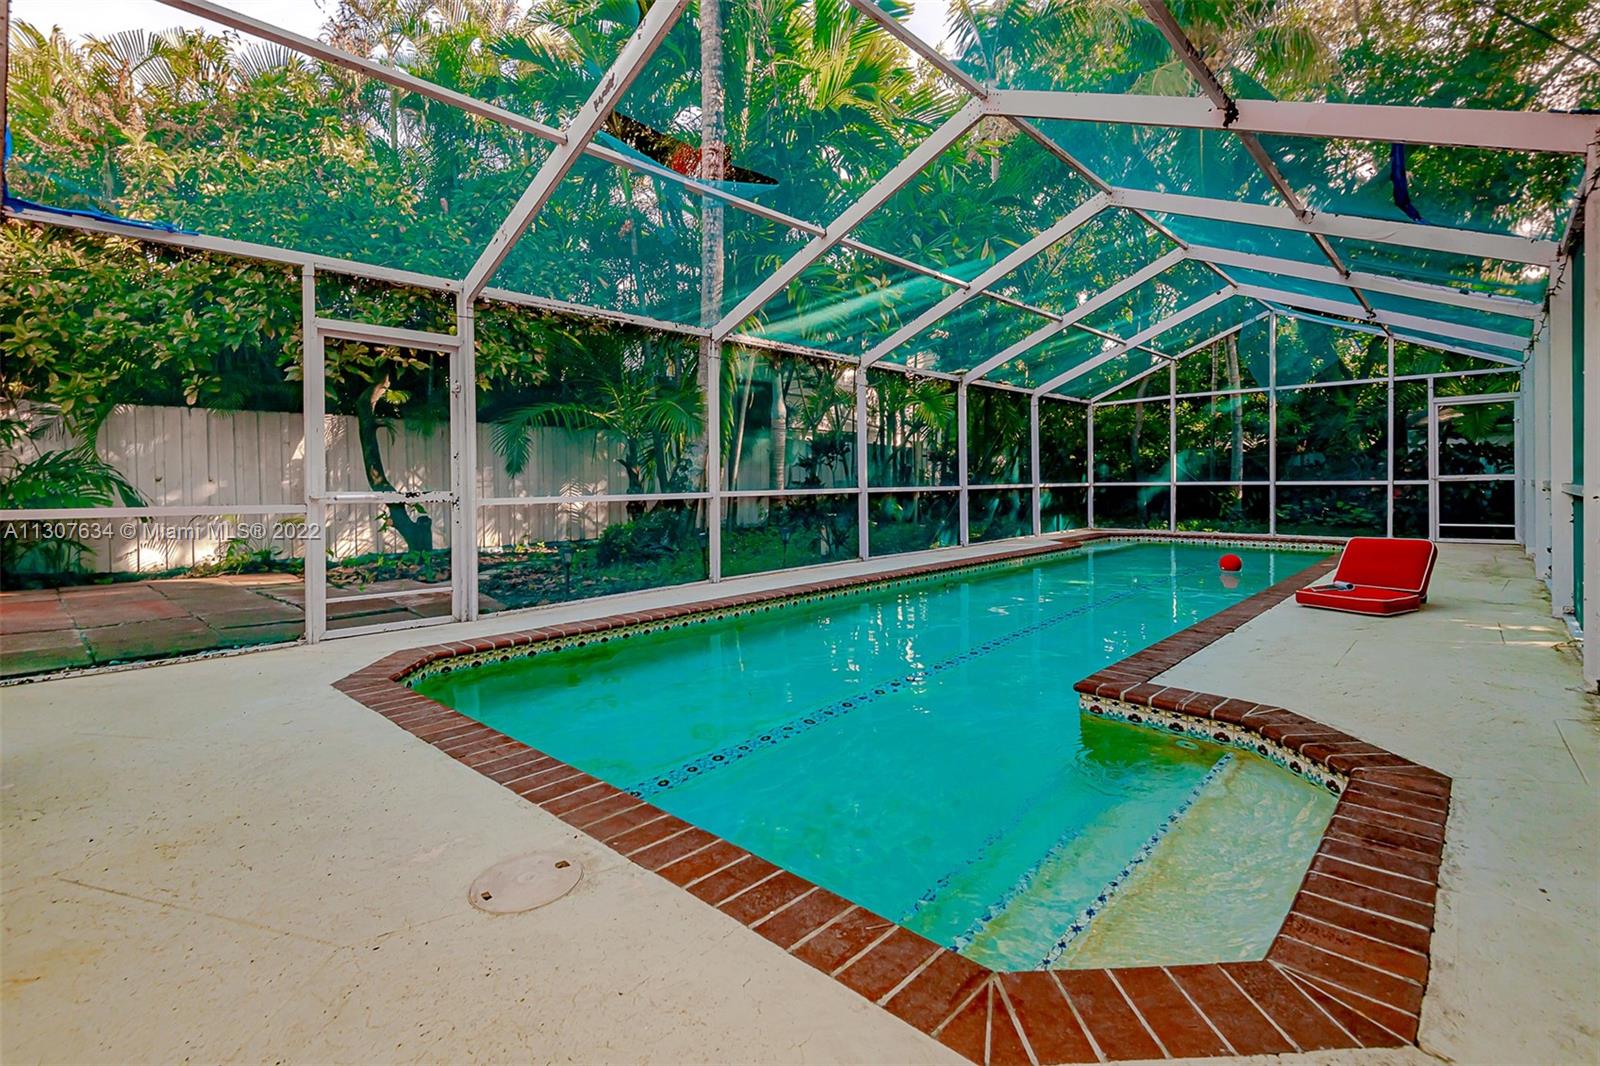 A tropical oasis in the heart of Silver Bluff with a large enticing swimming pool. This charming 1936 Bungalow is surrounded by a mix of palm trees and exotic vegetation offering utmost privacy on an oversized lot. Ideal for an investor, a renovator, or someone wishing to expand. An open floor plan with original hardwood floors, distinctive Pecky Cypress ceilings, and abundant natural daylight. Easy walk to Metrorail stations and Coral Way businesses with quick access to US1 and I95. Enjoy the cultural, shopping, and dining districts in nearby Coconut Grove. A short distance to downtown Miami, the Arsht Center for the Performing Arts, Biscayne Bay waterfront, University of Miami, Coral Gables, and the MIA International Airport. Great public transportation abounds with nearby bike lanes.